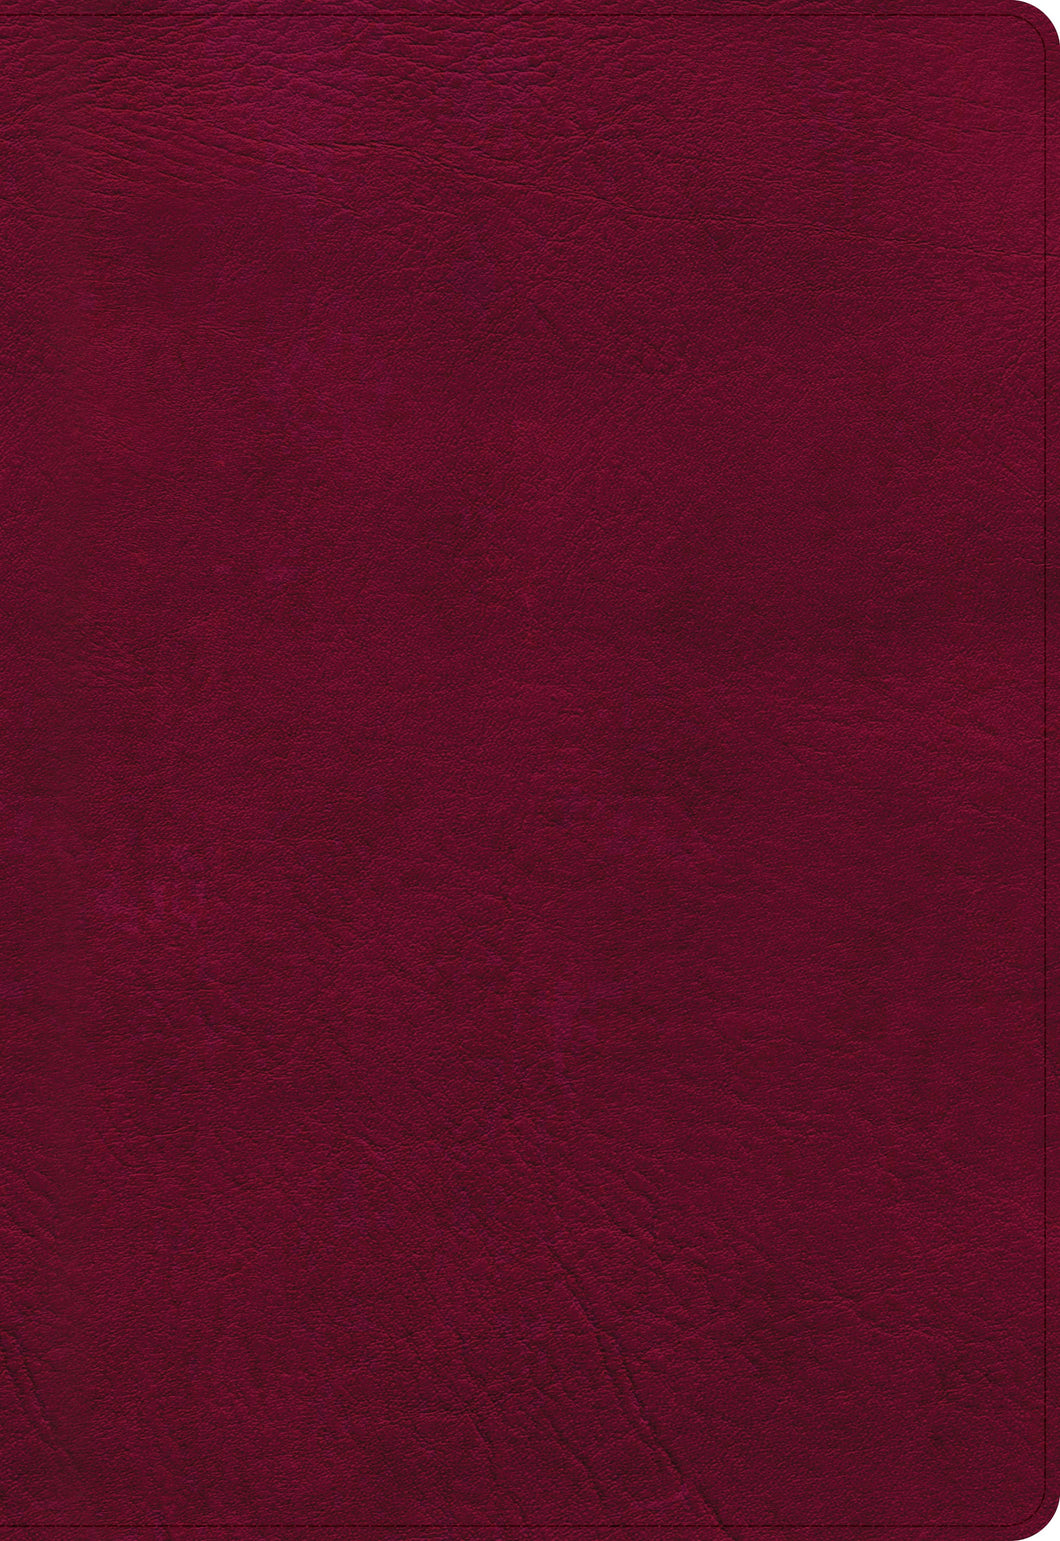 NASB 2020 Super Giant Print Reference Bible-Burgundy LeatherTouch Indexed